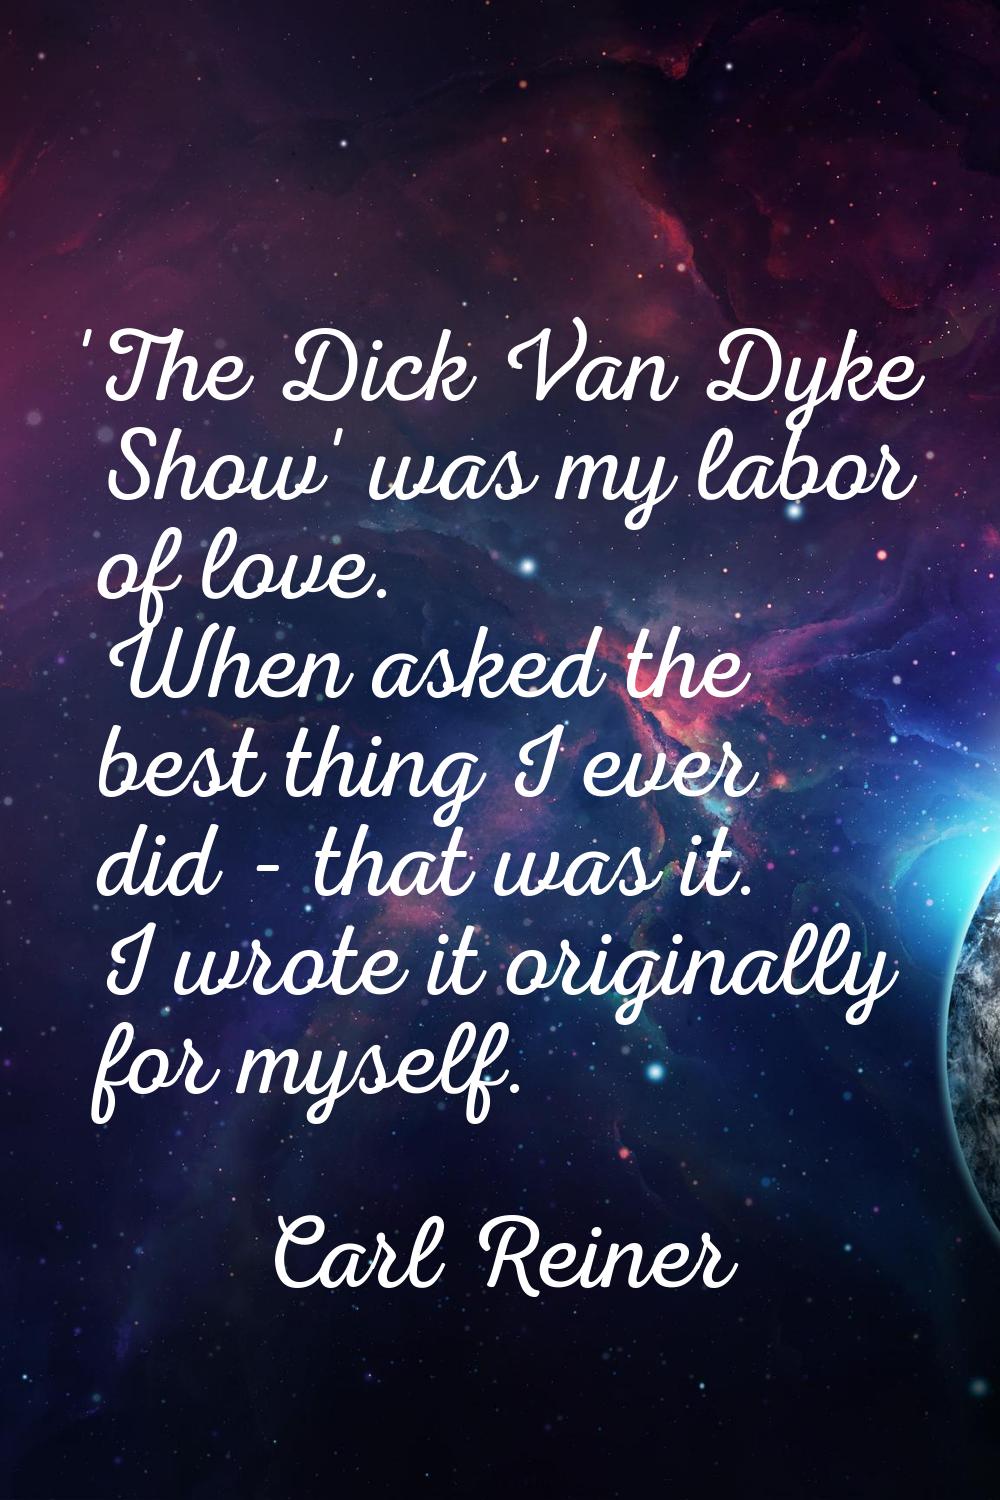 'The Dick Van Dyke Show' was my labor of love. When asked the best thing I ever did - that was it. 